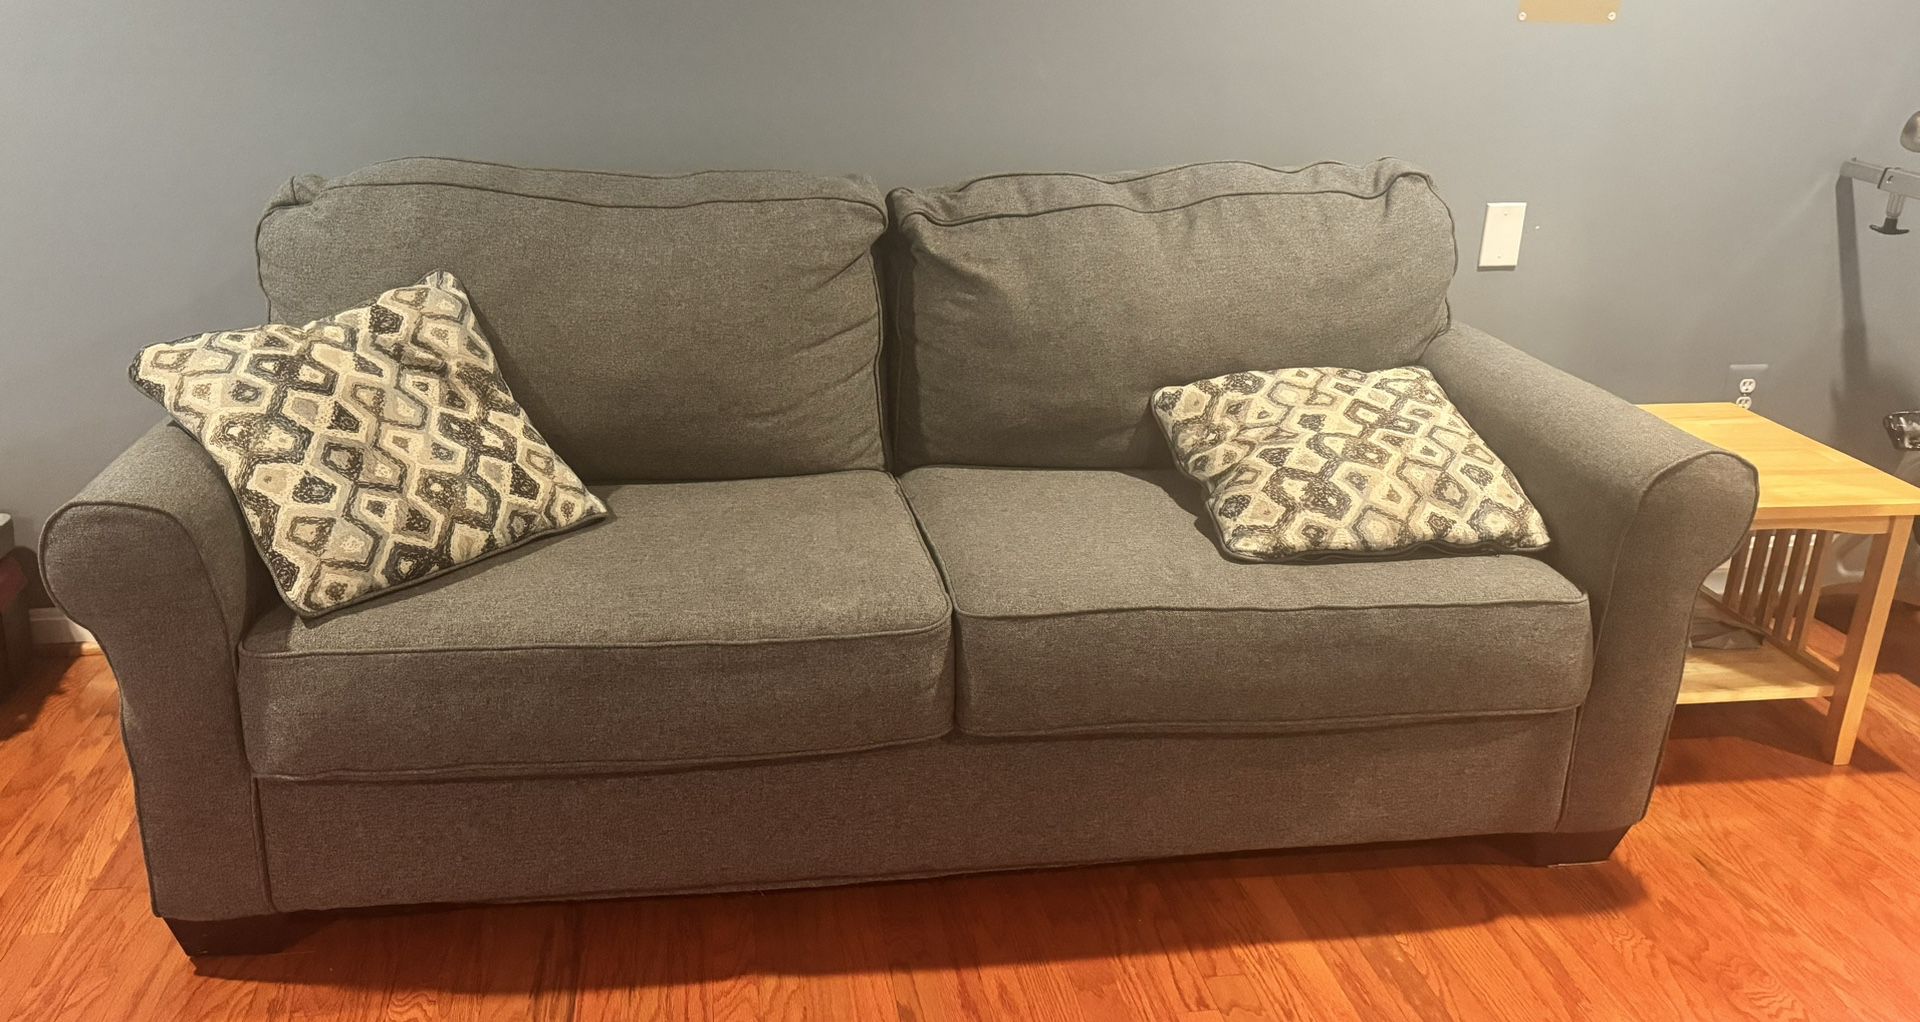 Couch + Side Table